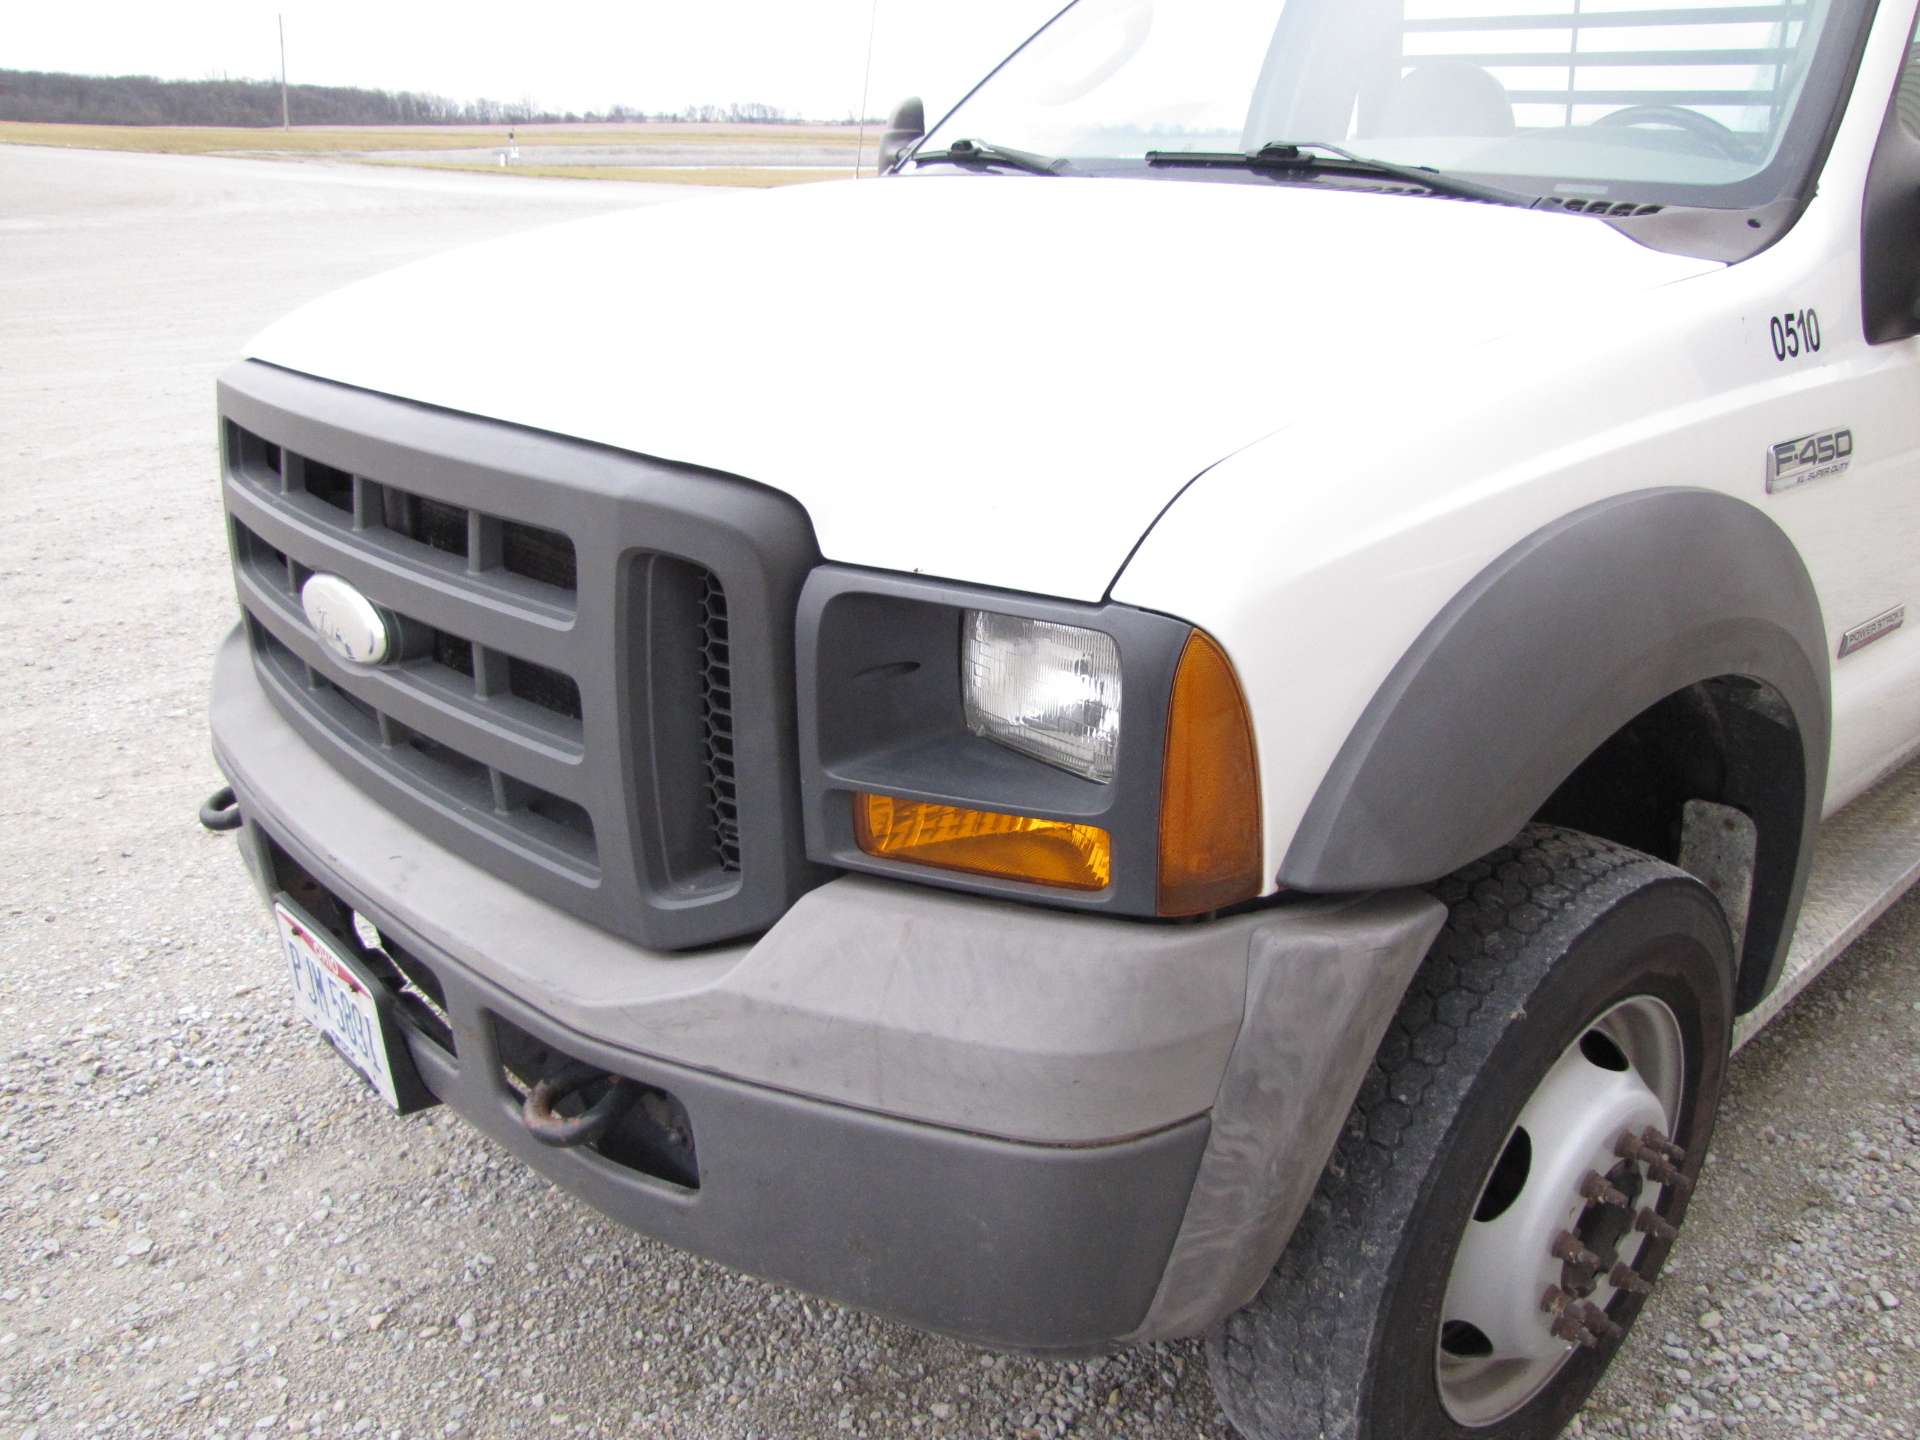 2005 Ford F450 XL Super Duty pickup truck - Image 12 of 55